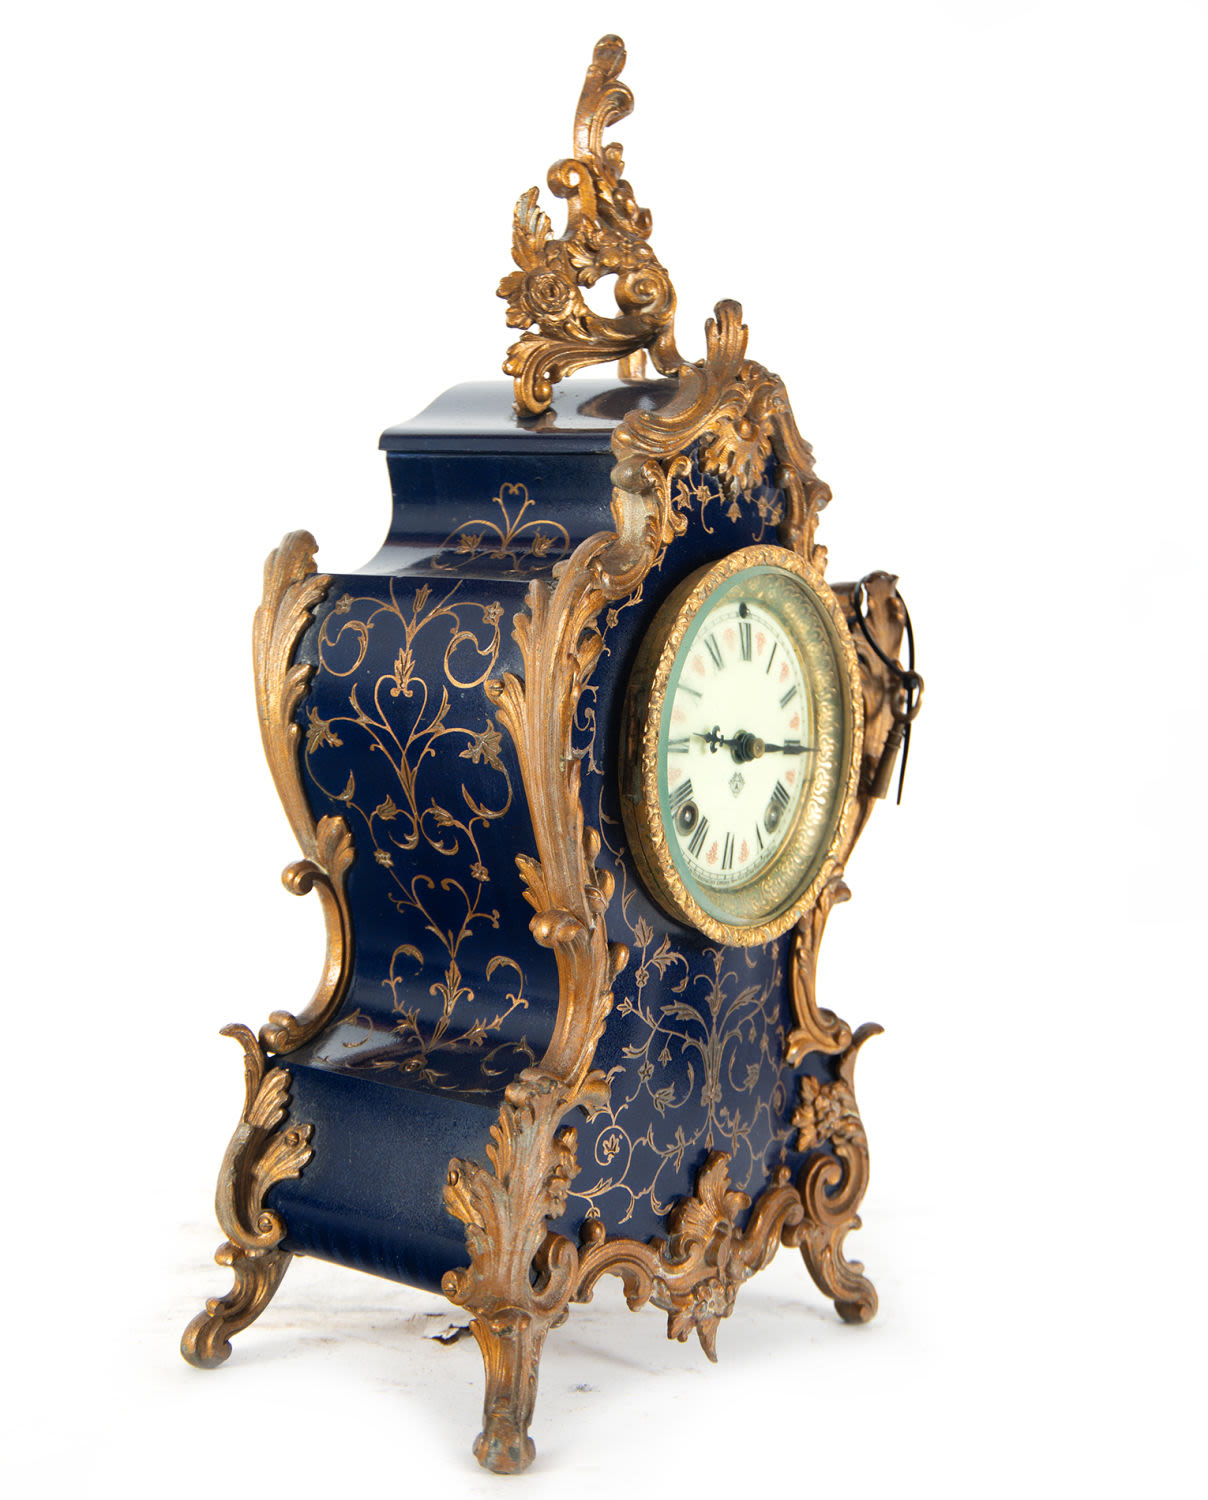 Louis XV style clock in gilt bronze and enamels, 19th century - Image 2 of 5